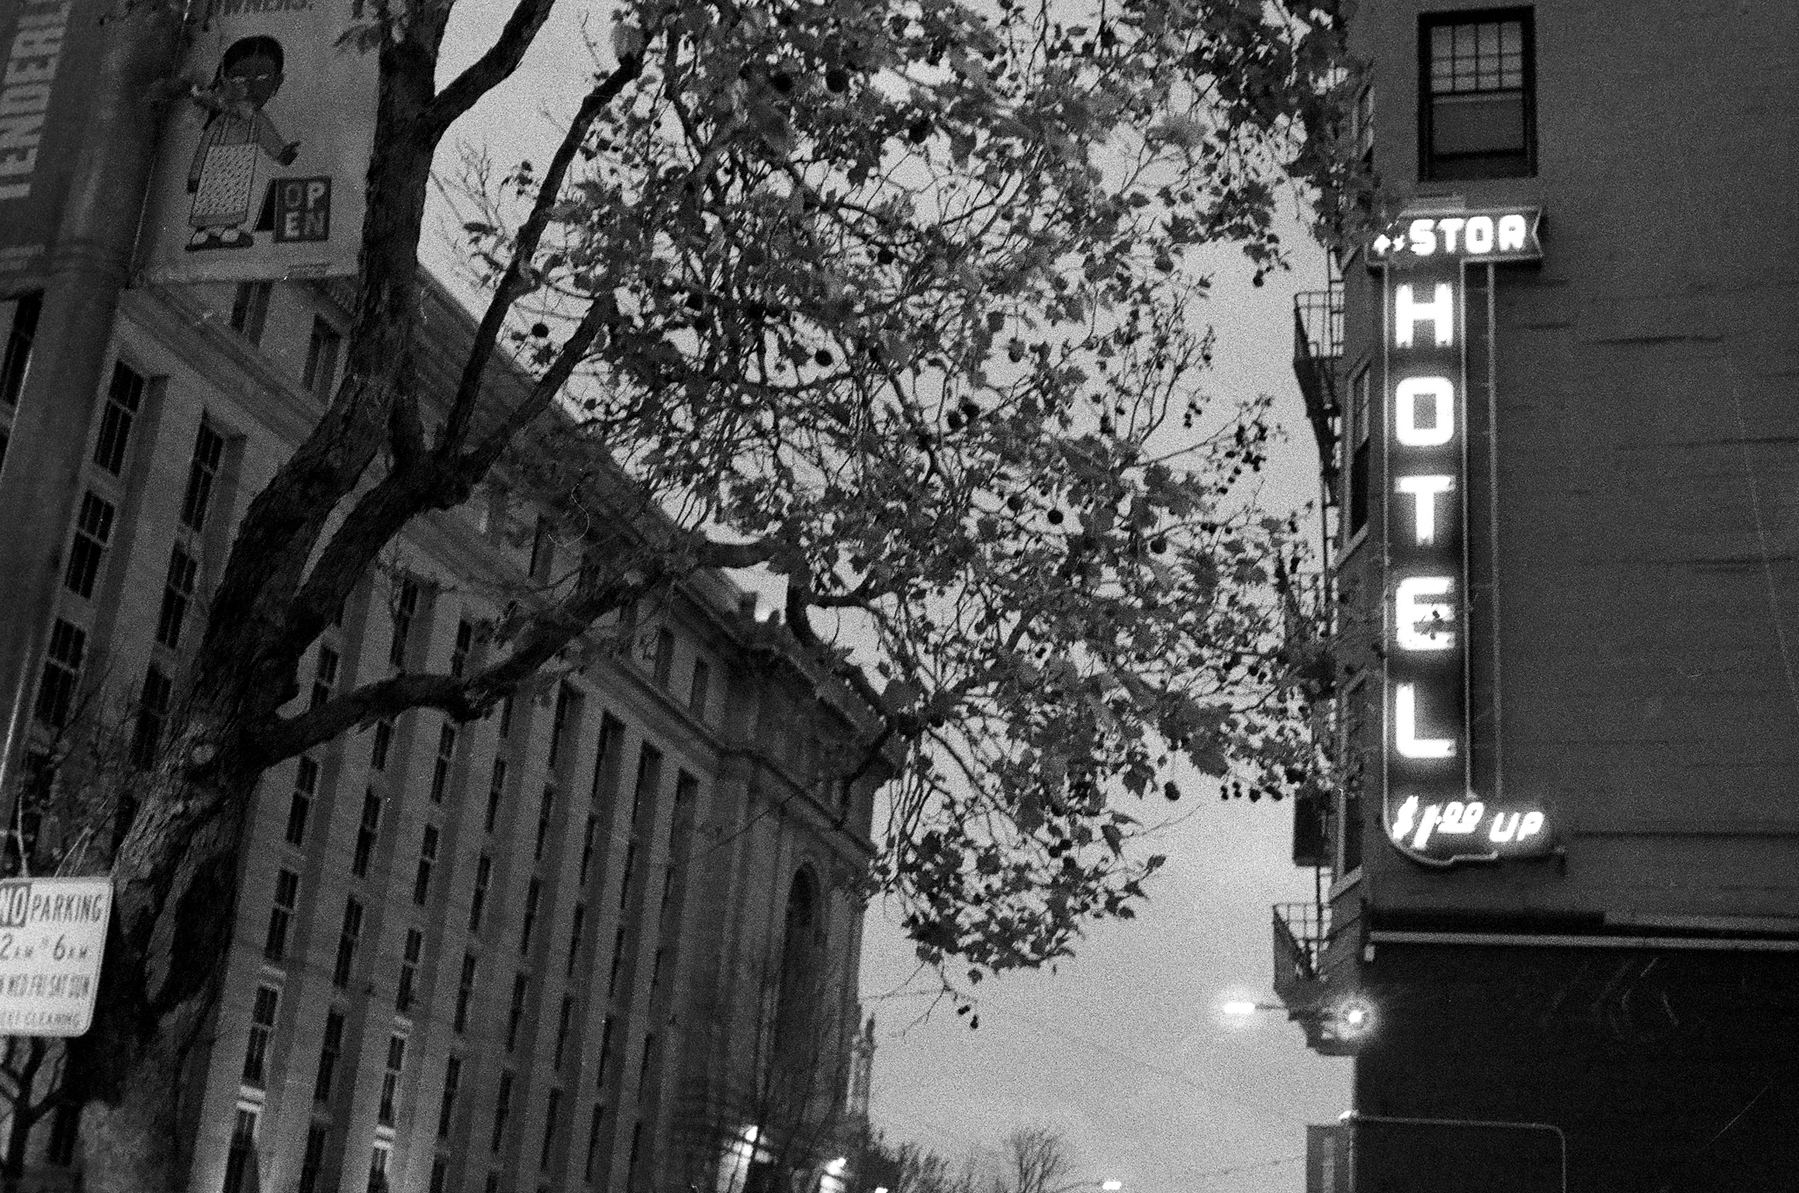 a scan of a black and white photograph of a hotel neon sign in Civic Center San Francisco